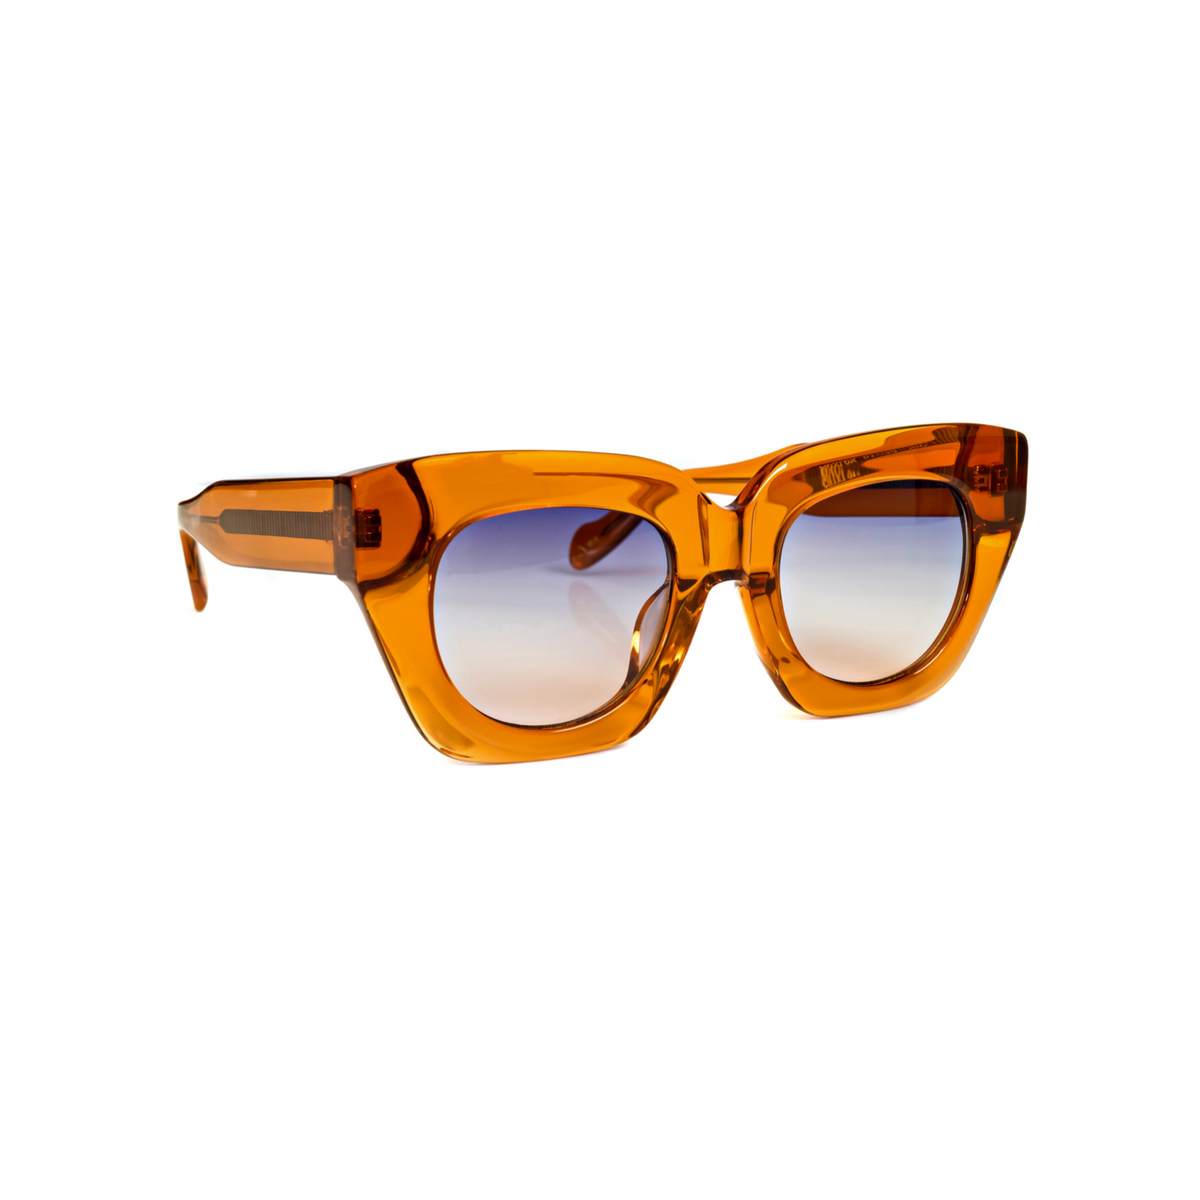 Think Big Sunglasses in Glossy apricot